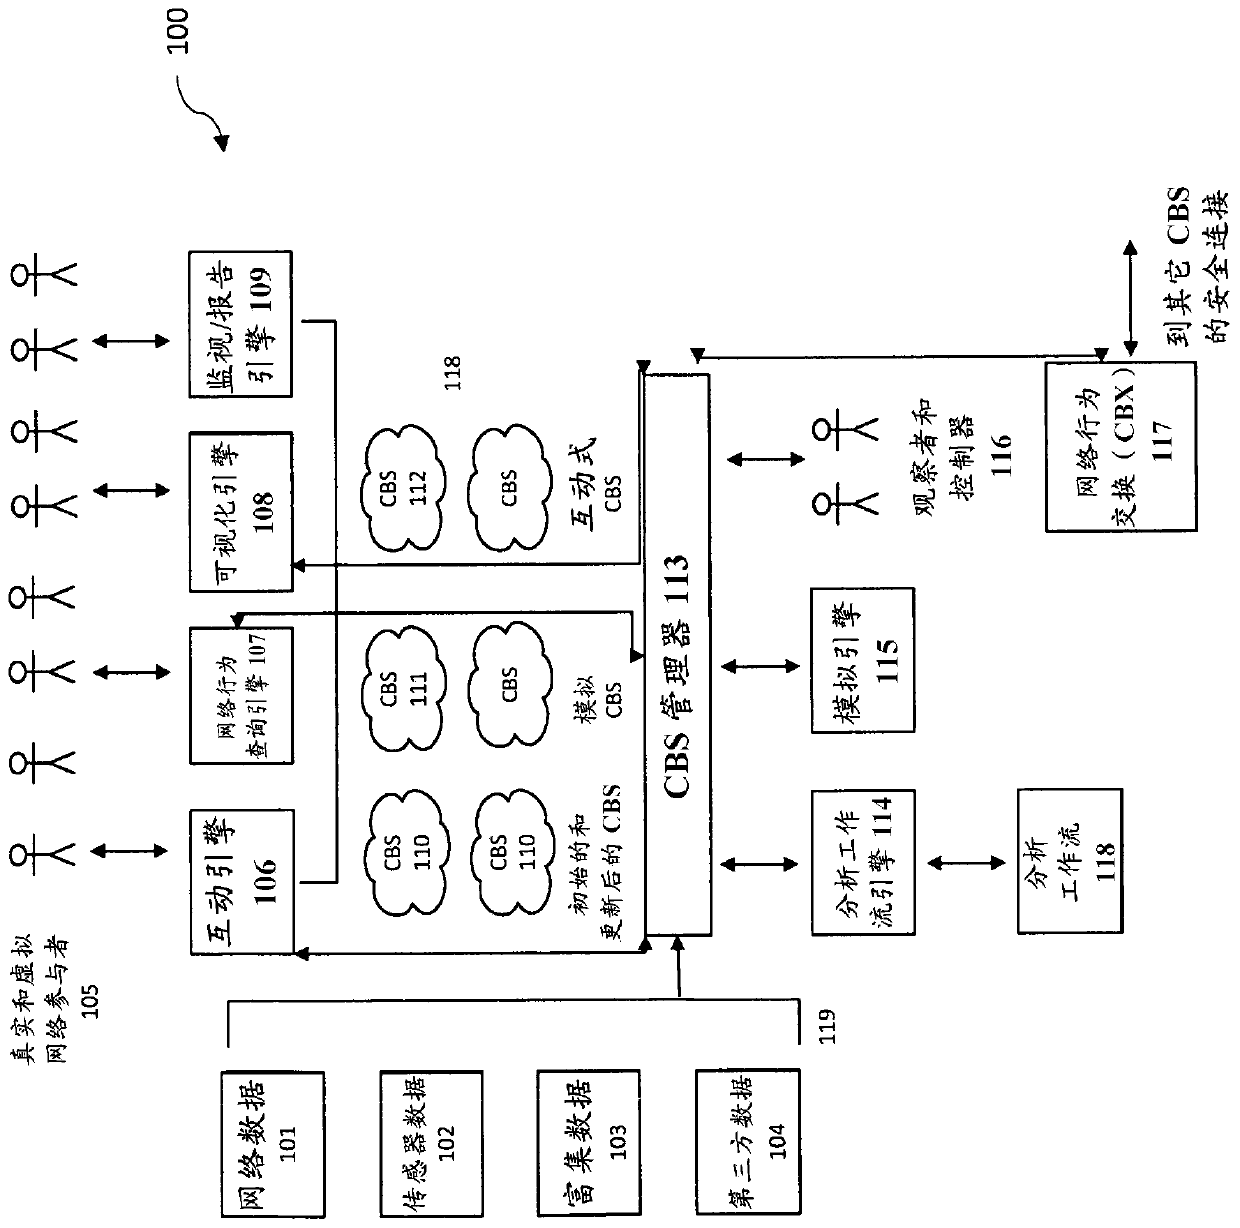 Network Behavior System Based on Simulation and Virtual Reality